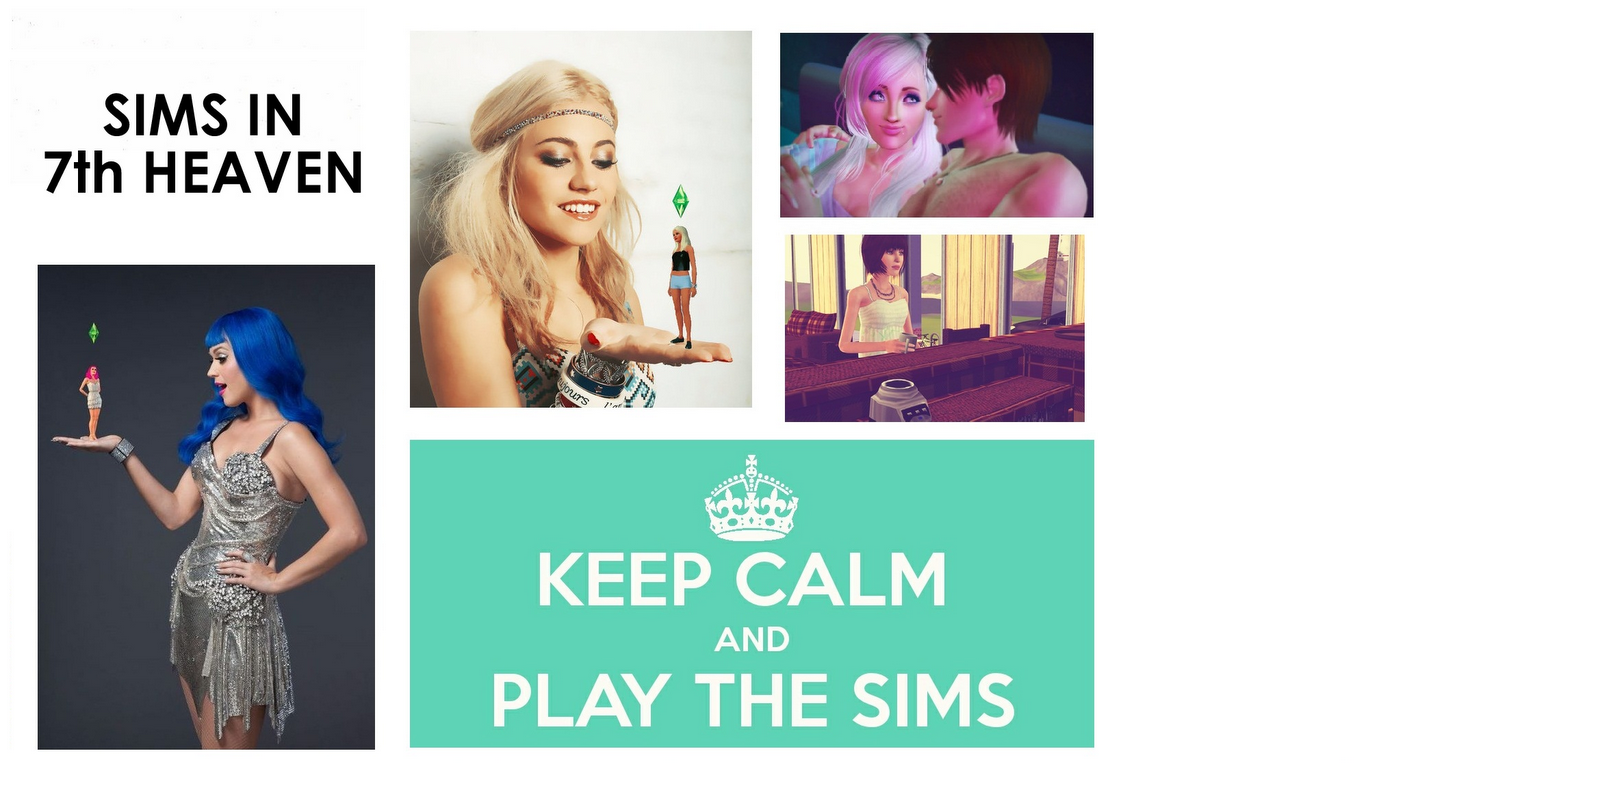 Sims in Seventh Heaven